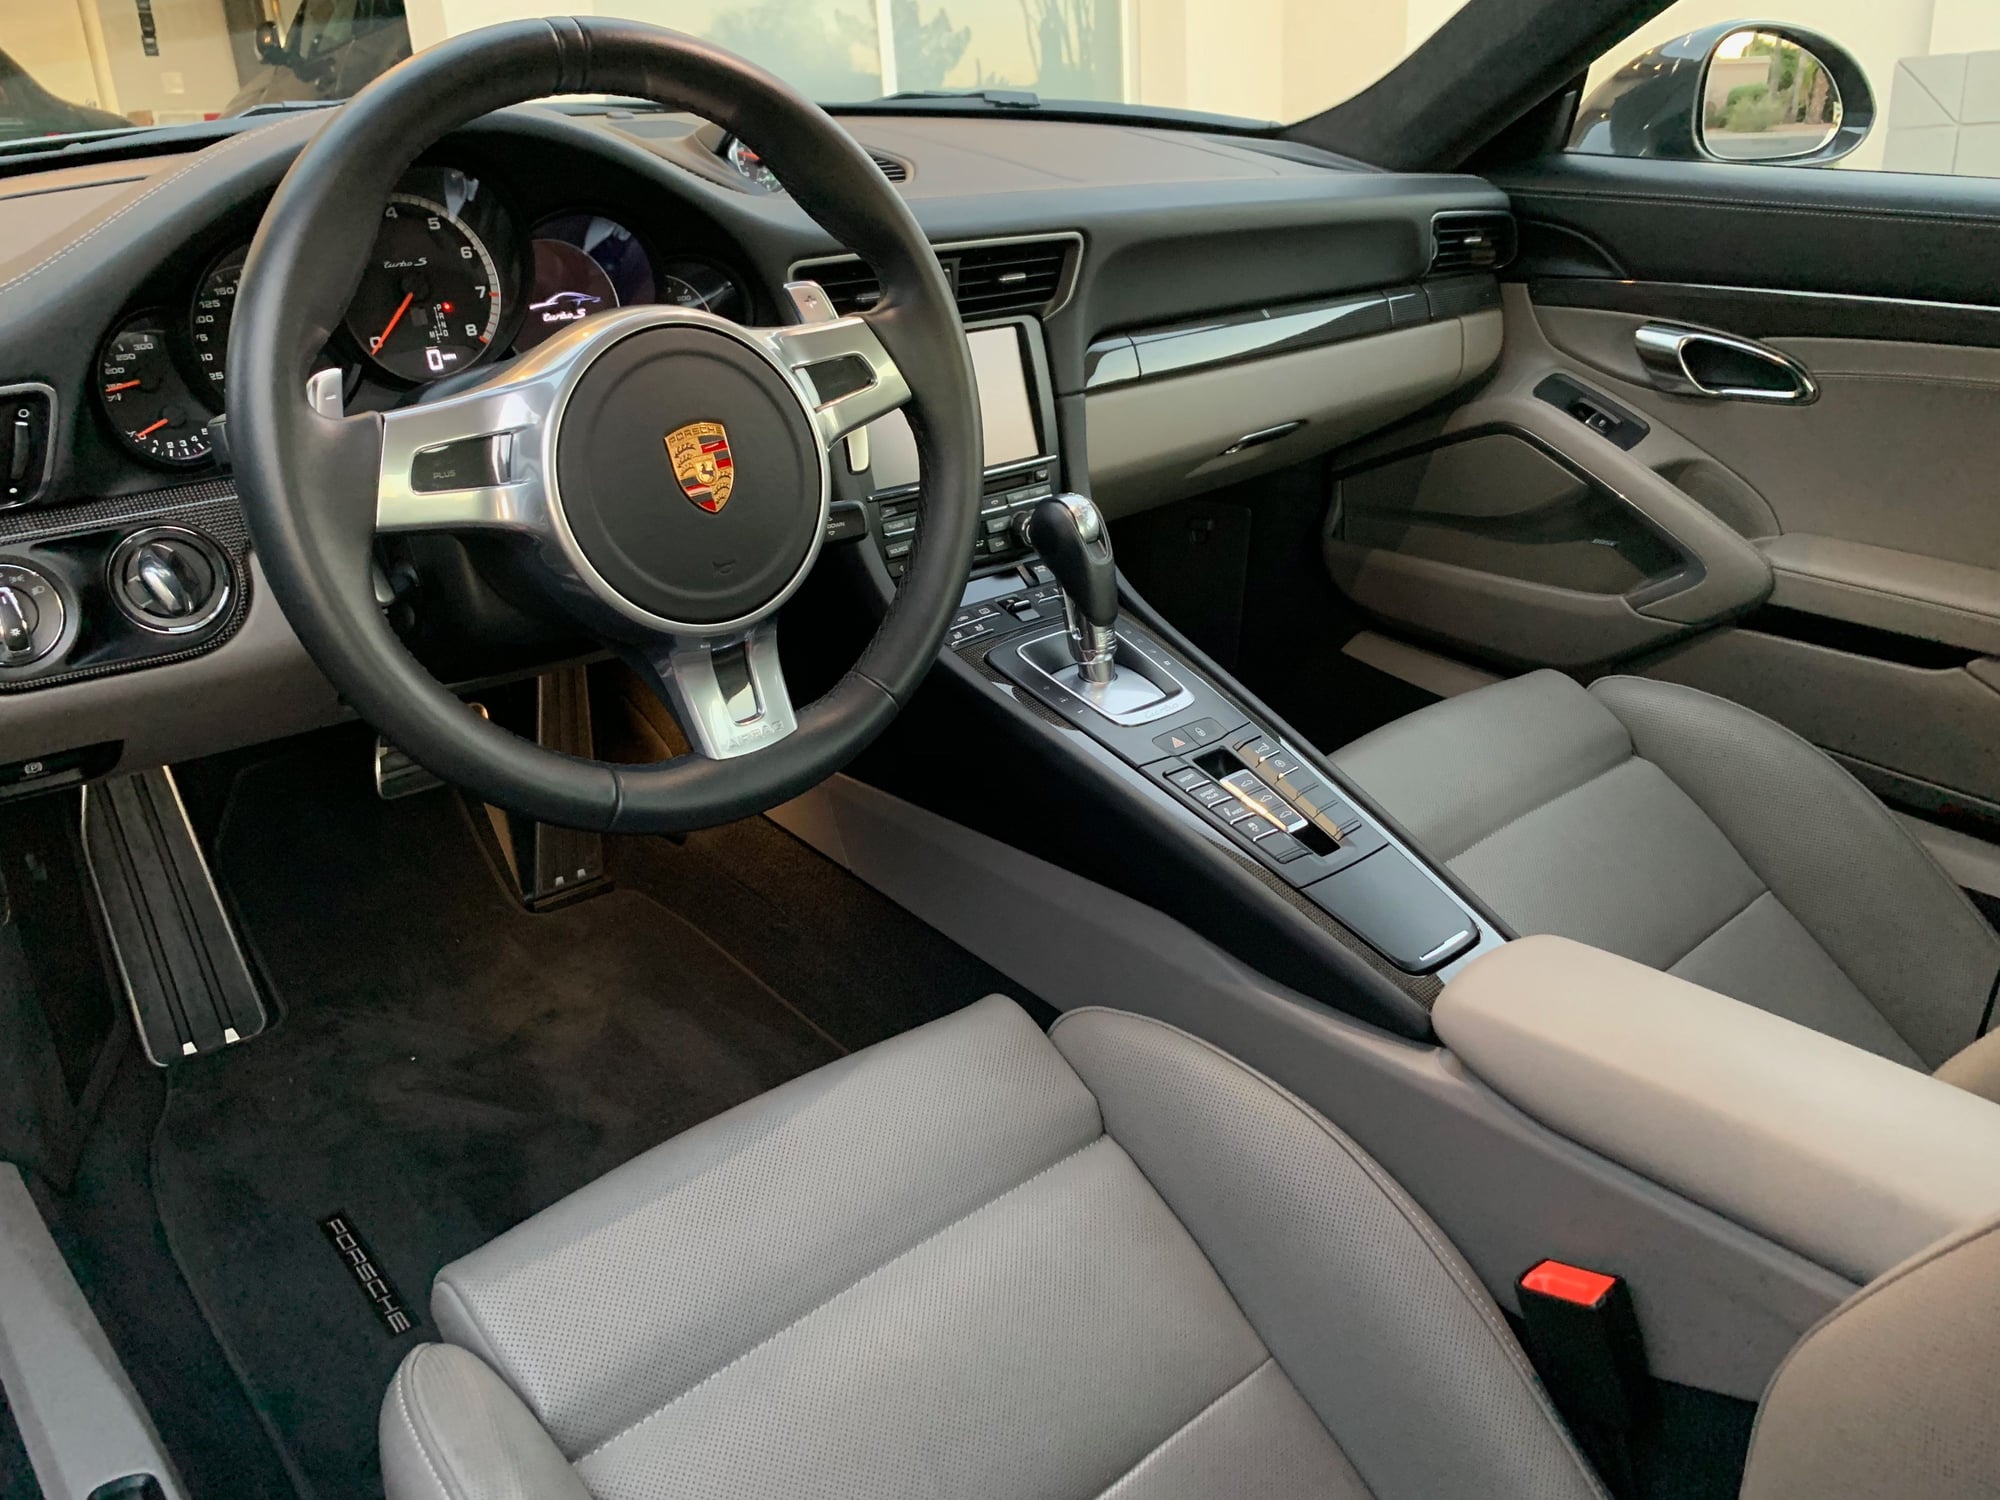 2016 Porsche 911 - 2016 991 Turbo S - PTS Slate Grey - Used - VIN WP0AD2A91GS166298 - 6,100 Miles - 6 cyl - AWD - Automatic - Coupe - Gray - Phoenix, AZ 85018, United States